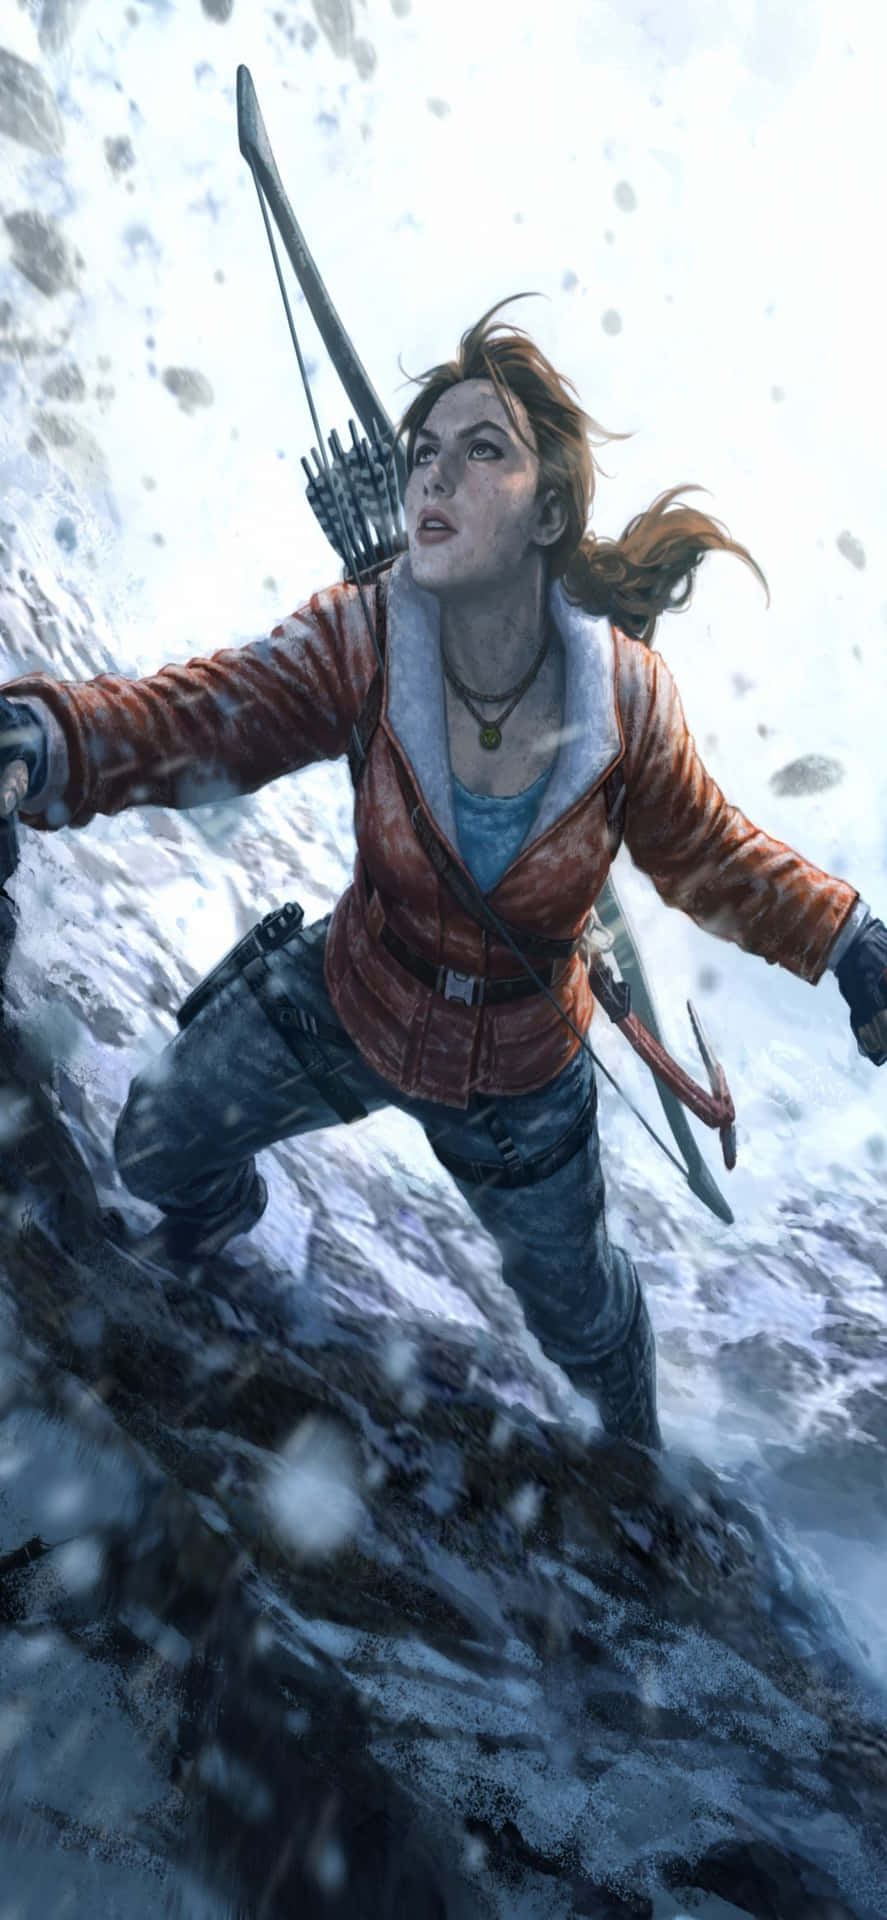 Enjoy Rise Of The Tomb Raider on the New Iphone Xs Max